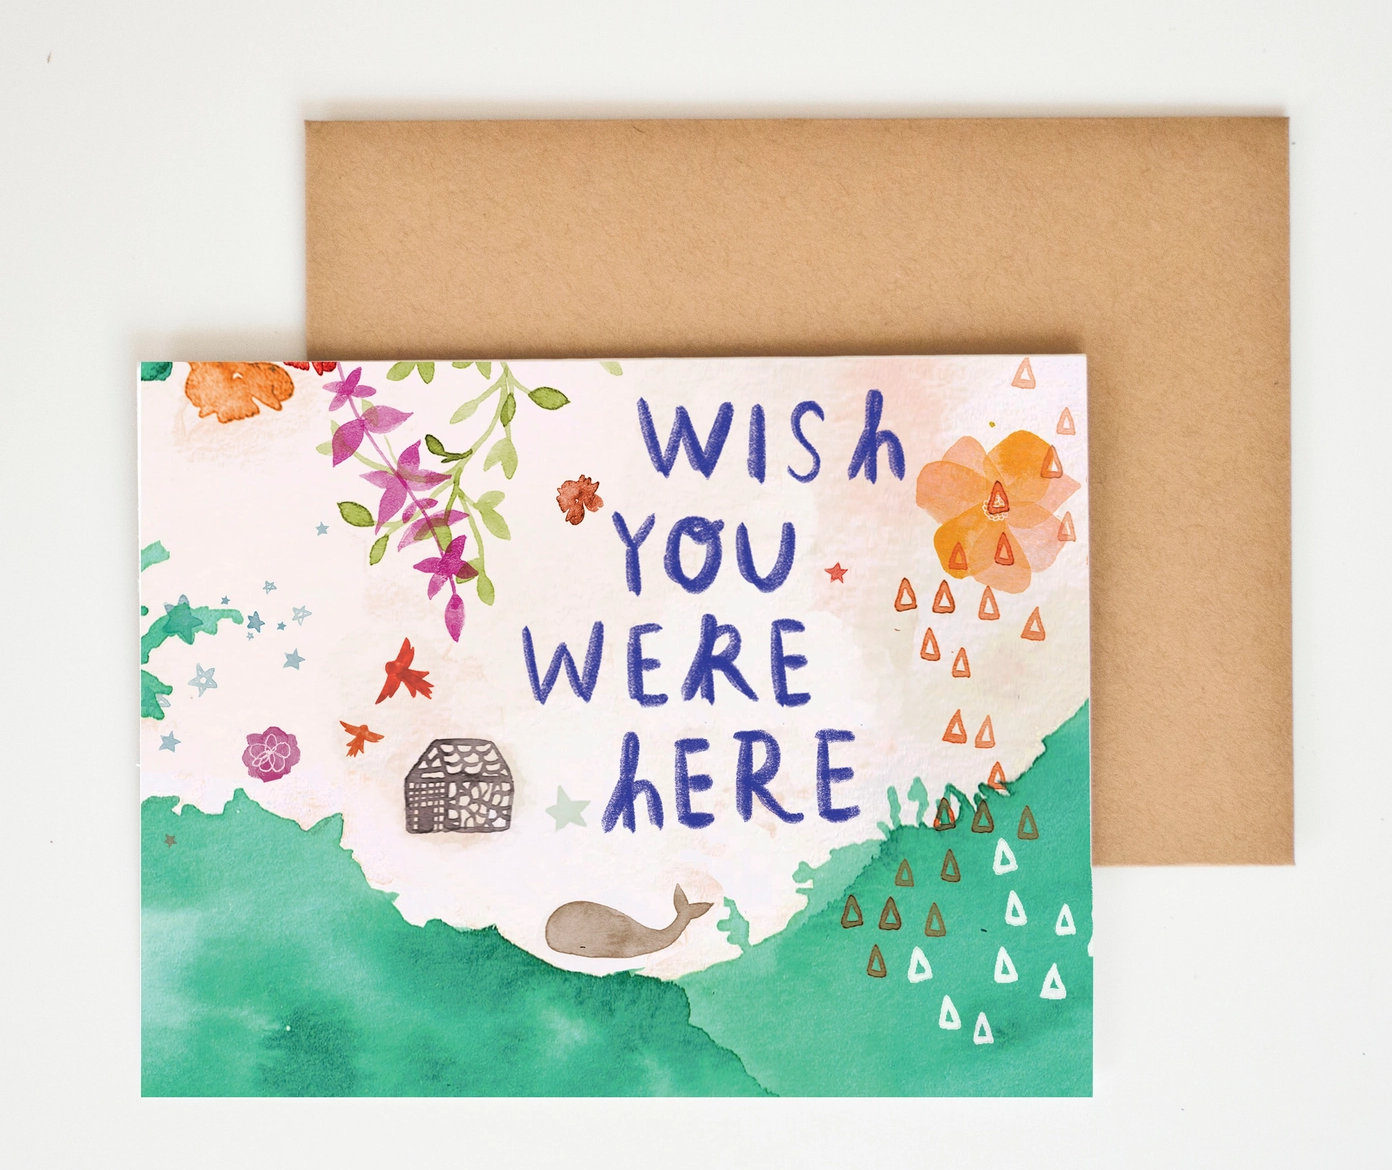 Wish You Were Here  August 10, 2019 - Air Mail